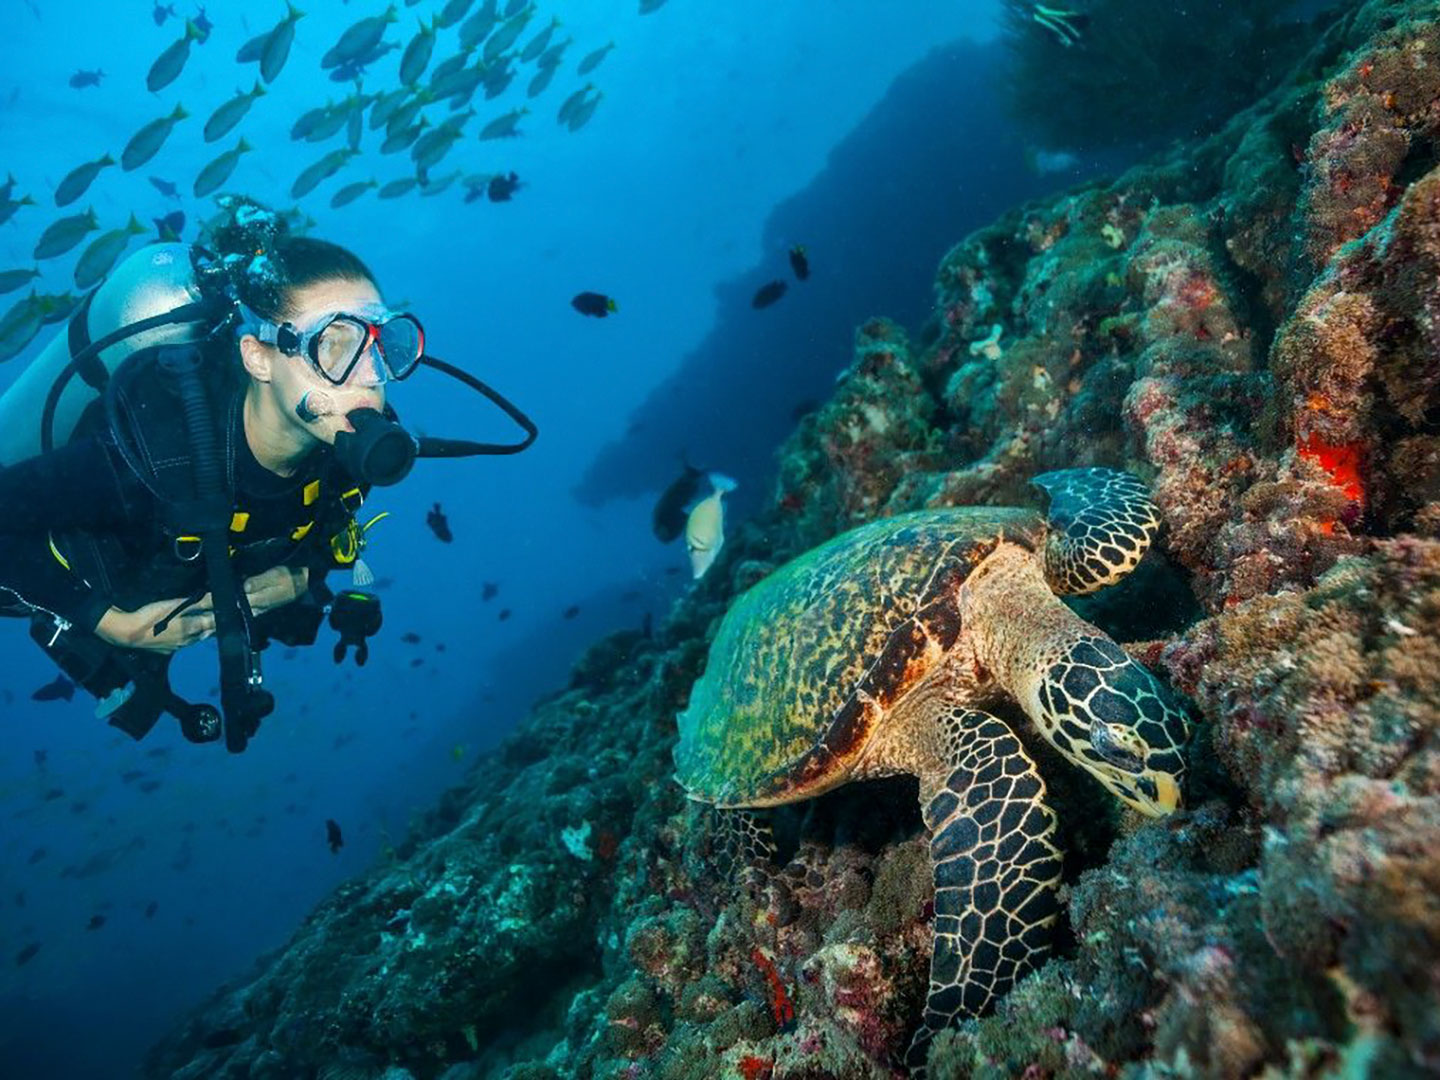 Grand Park Kodhipparu, House Reefs and Diving Course